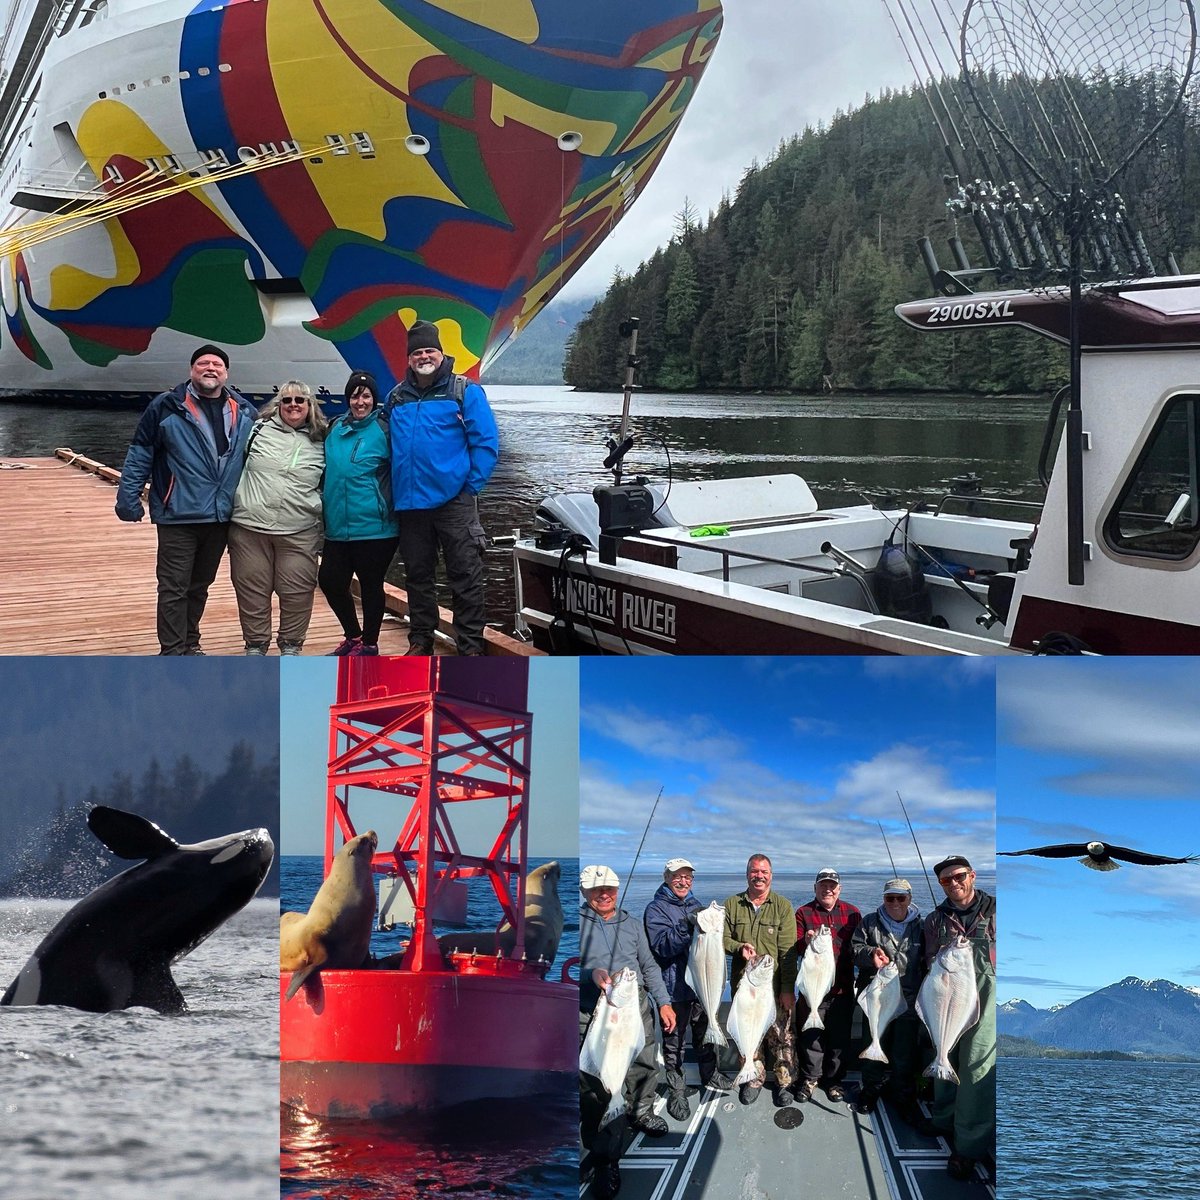 Reel Alaska Fishing Charters 
Ketchikan Alaska 
Let’s make some lifelong memories together! 
Stay tuned for some big news coming out by the end of April! 
#fishalaska #alaskafishing #cruisealaska #alaskacruise #ketchikan #alaska #vacationtime #thealaskalife #wanderlust…